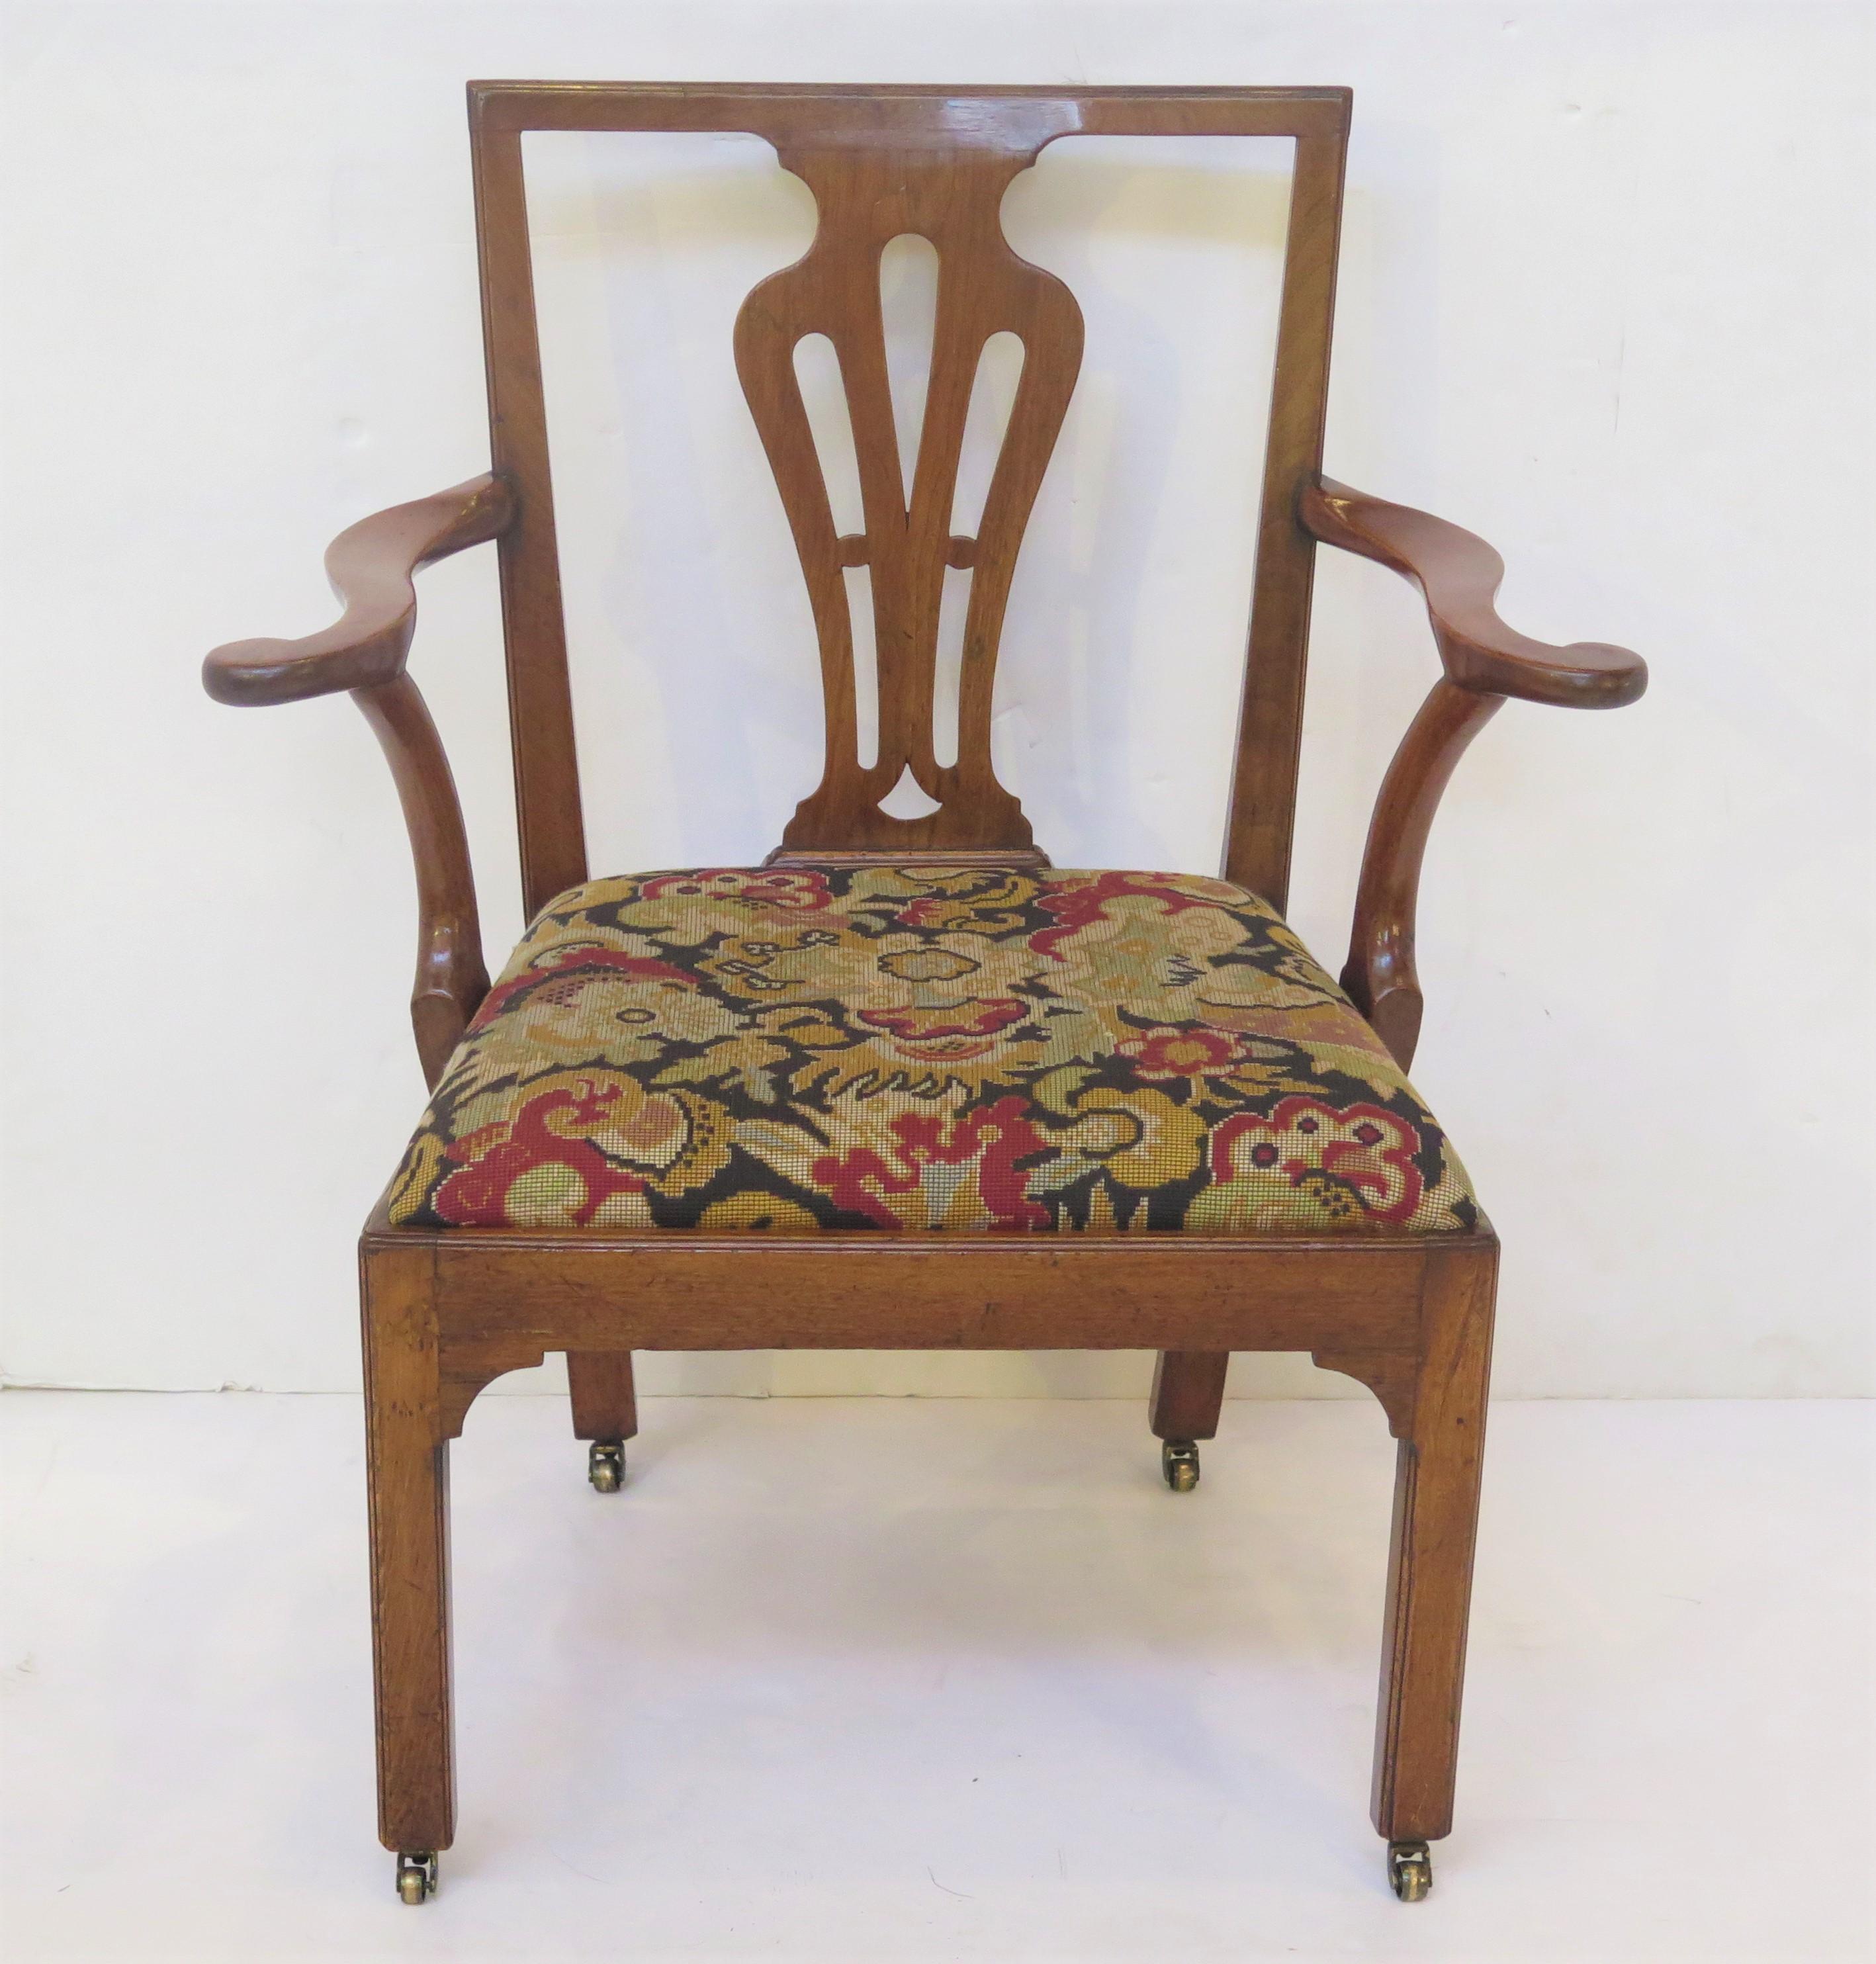 a handsome Georgian armchair or desk chair, walnut with needlepoint slip seat, flat-top crest rail above a pierced vasiform splat, scrolled arms, upholstered seat raised on Marlborough legs and with small brass castors, England. 18th century